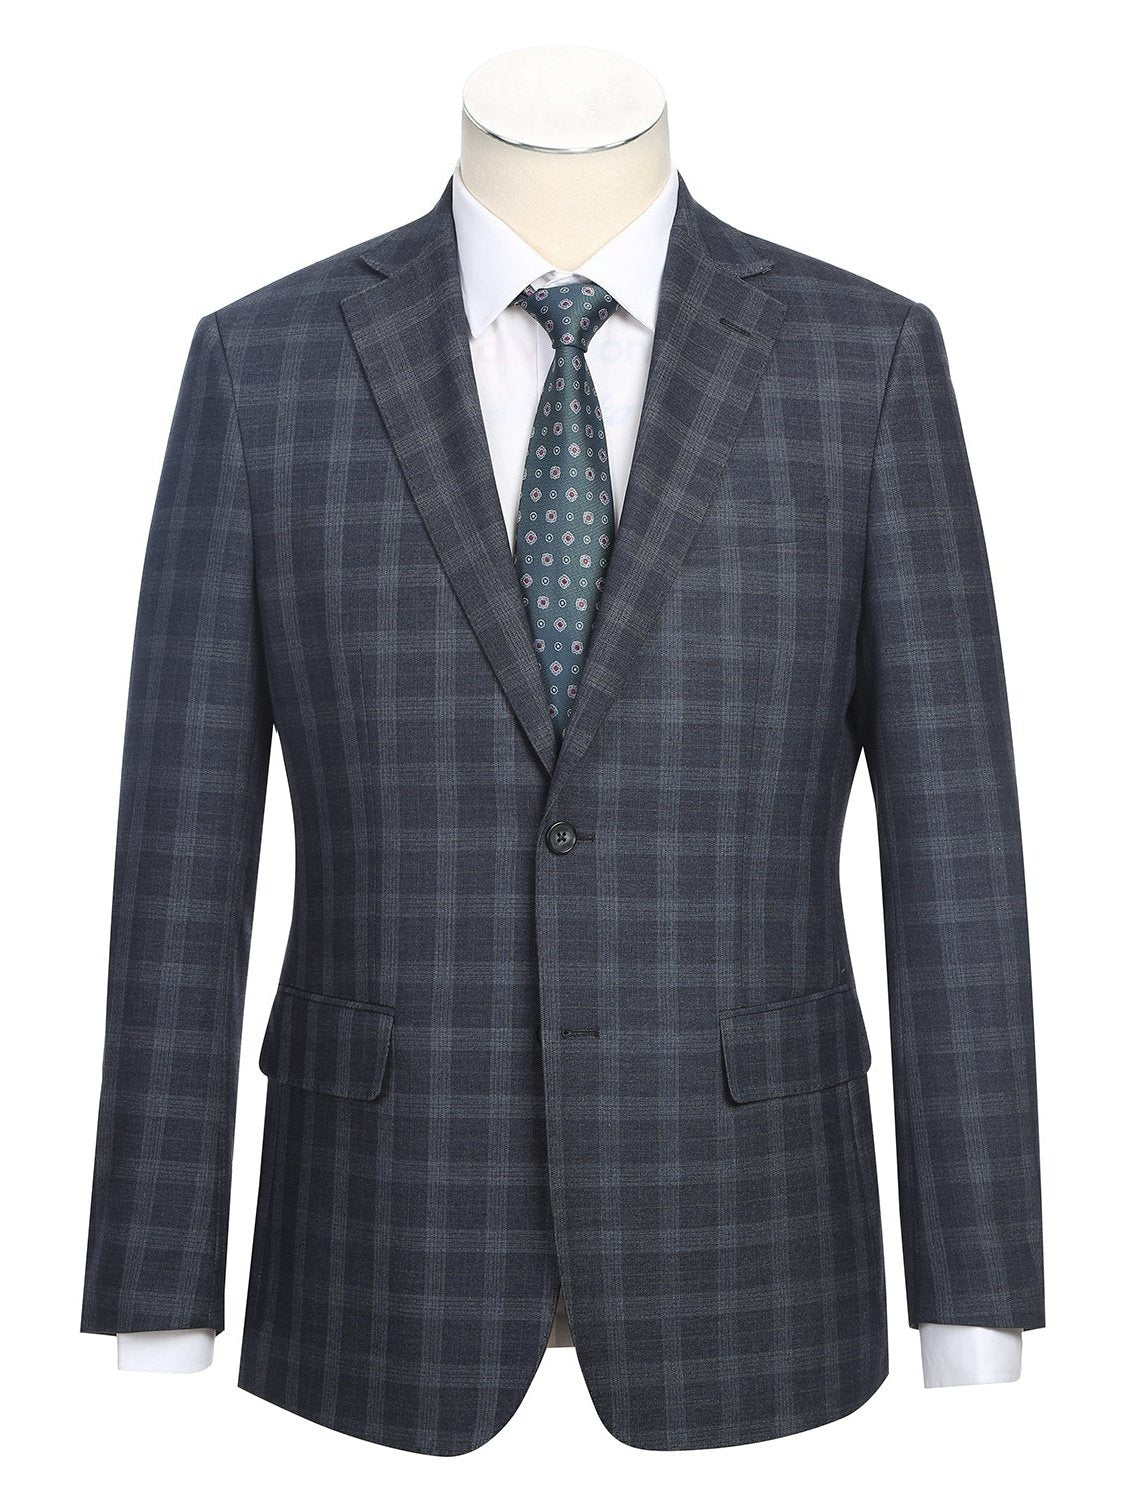 English Laundry Slim Fit Two button Iron Gray Check Peak Lapel Suit